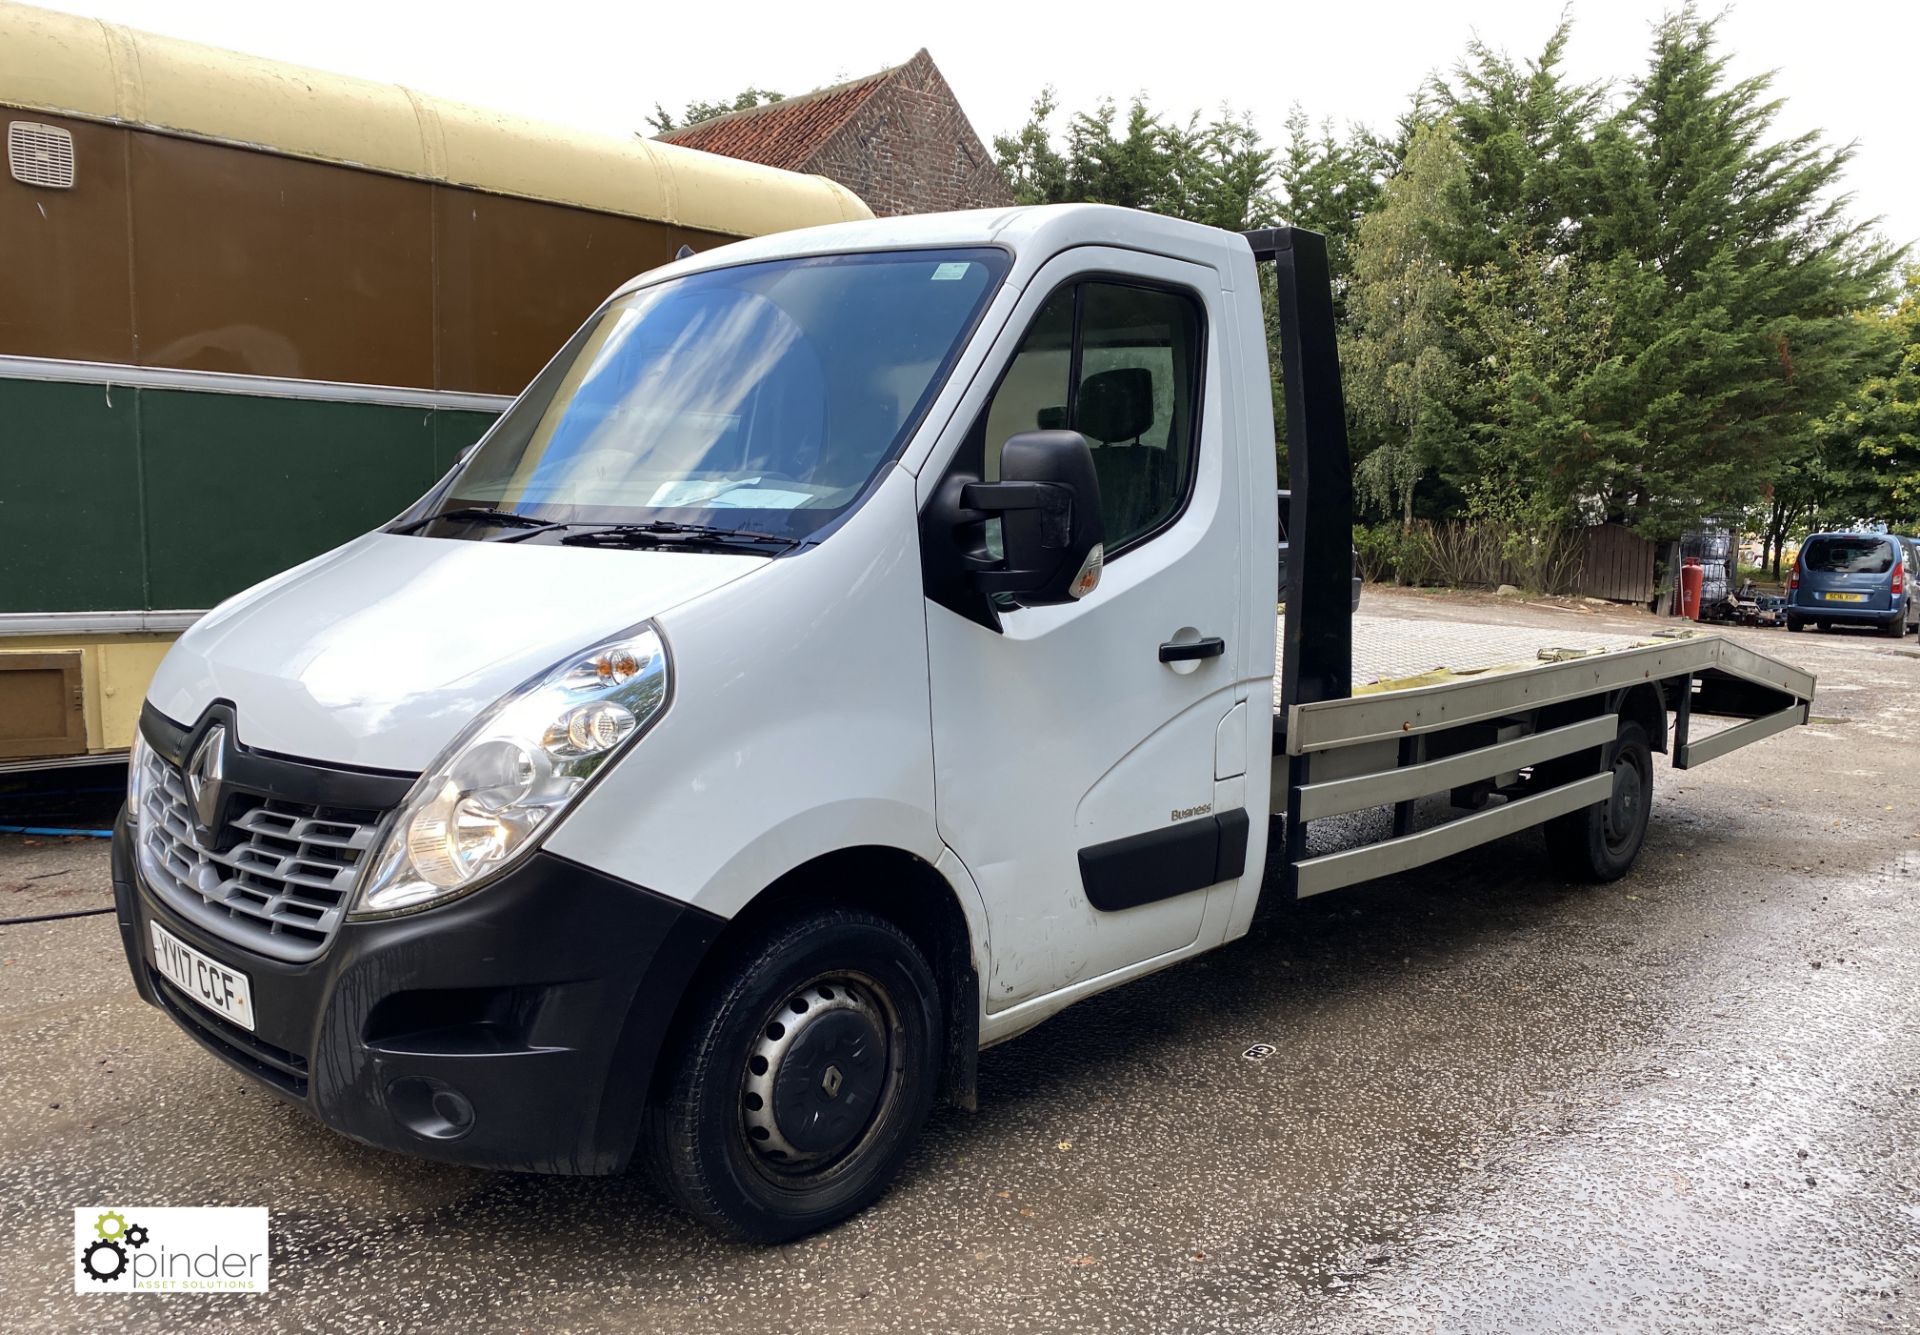 Renault Master FWD LL35 dci 130 Recovery Truck, registration YY17 CCF, date of registration 31 March - Image 7 of 20